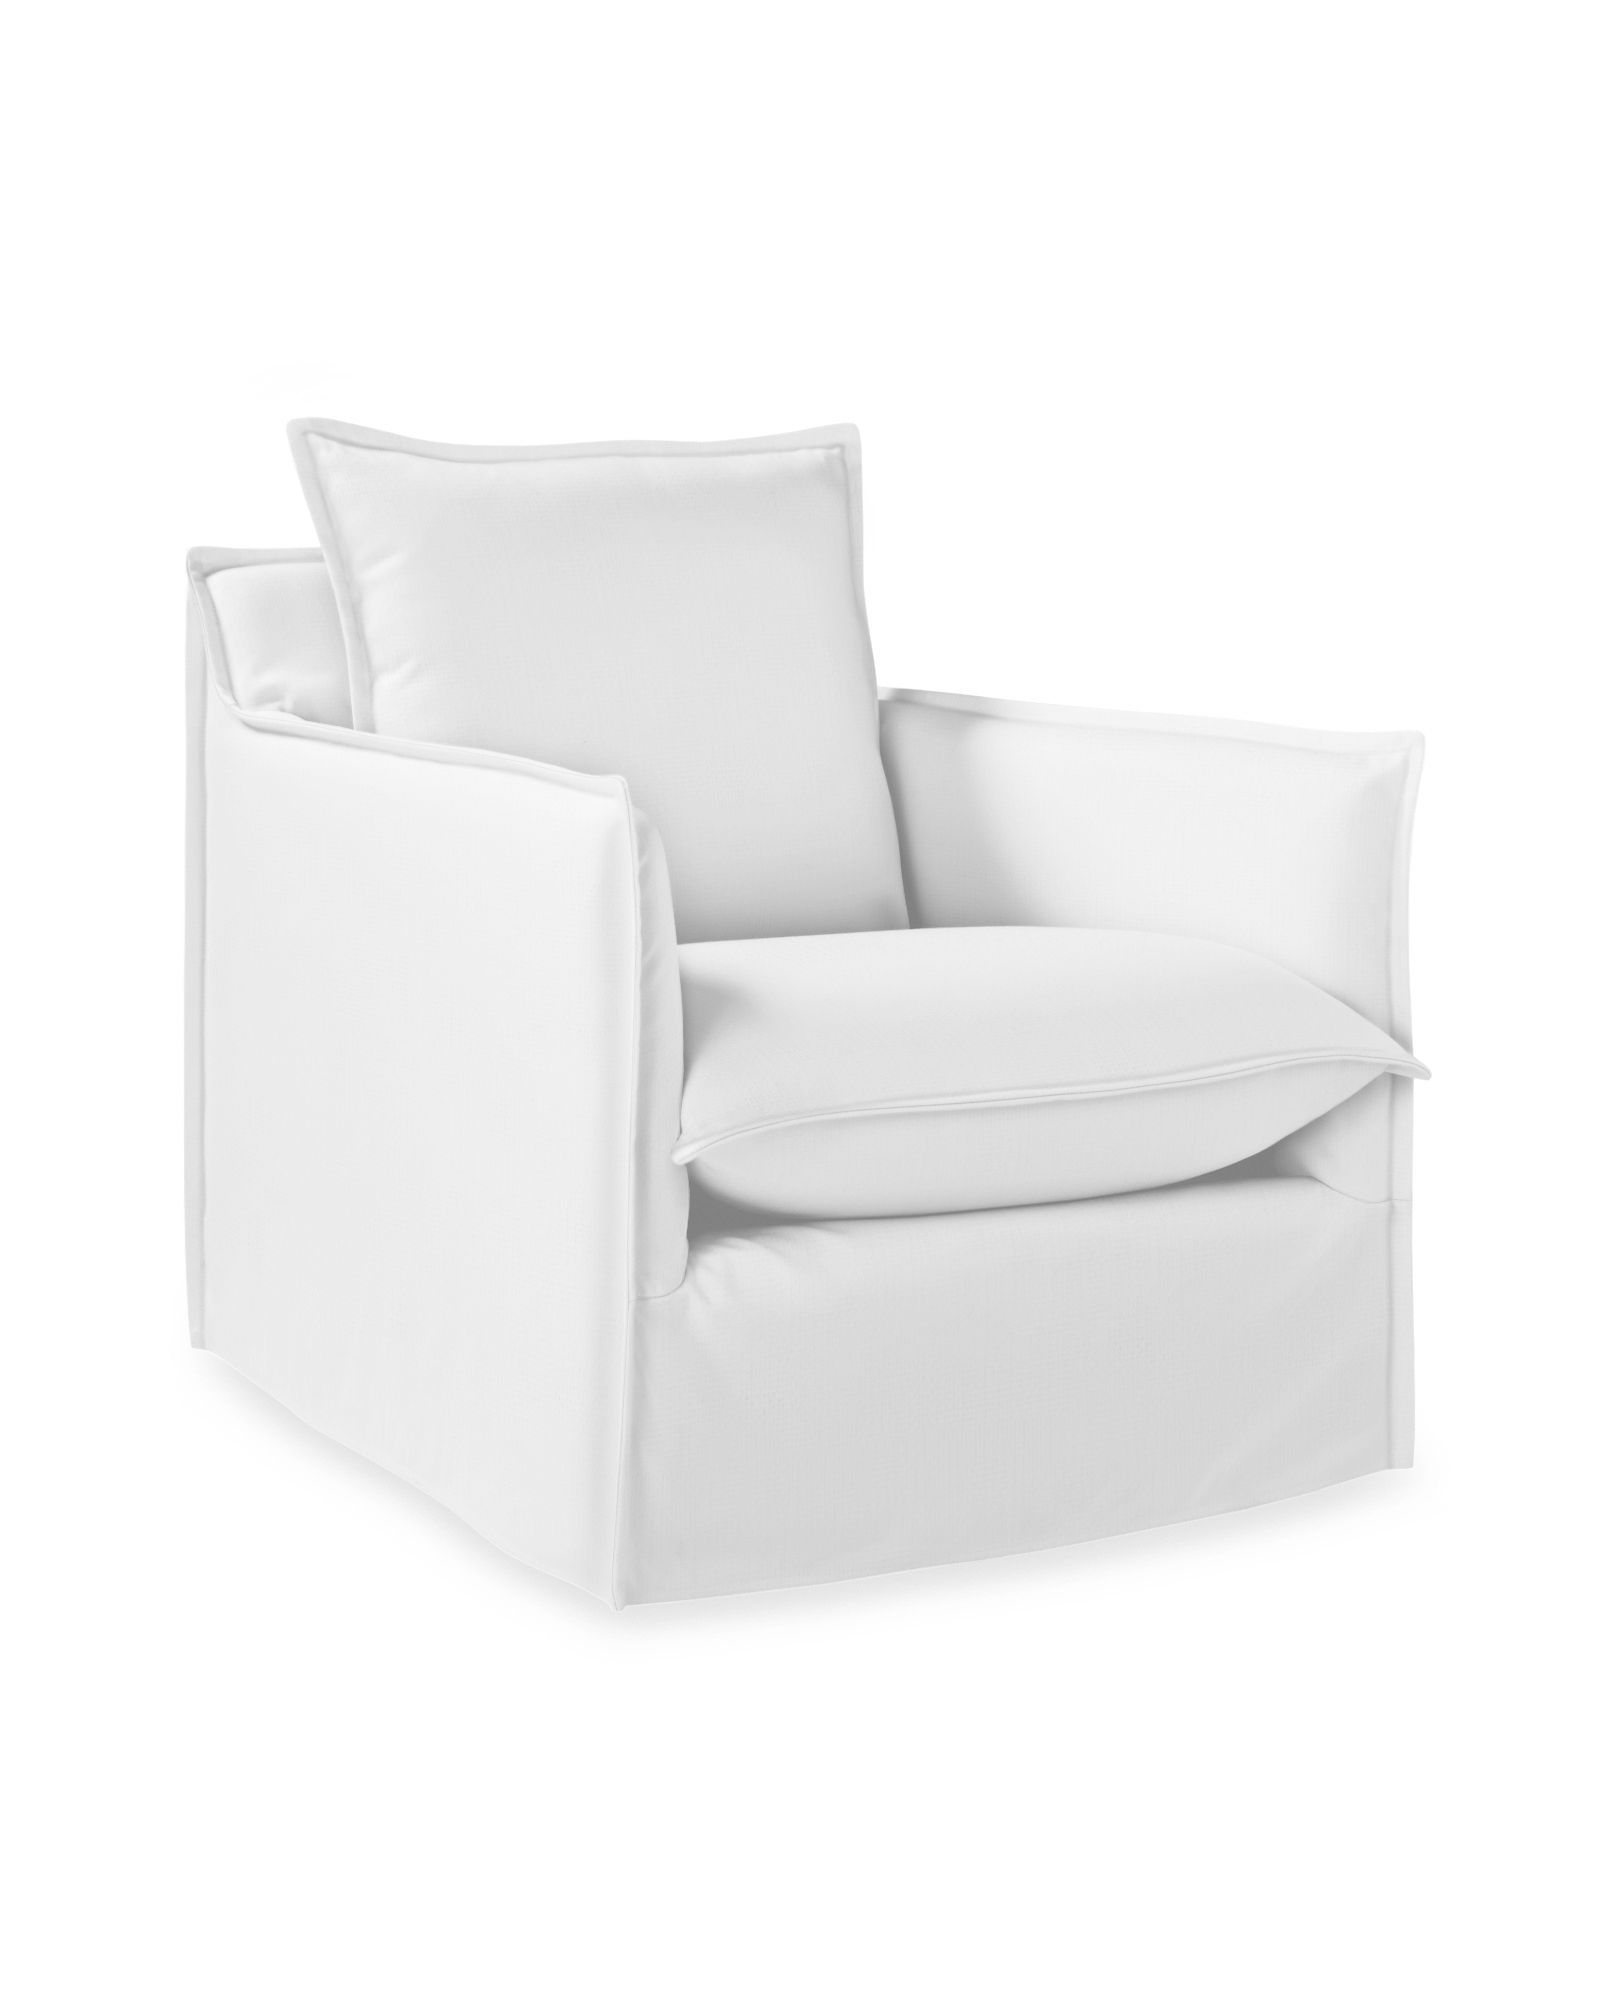 Hayden Swivel Glider - Slipcovered | Serena and Lily